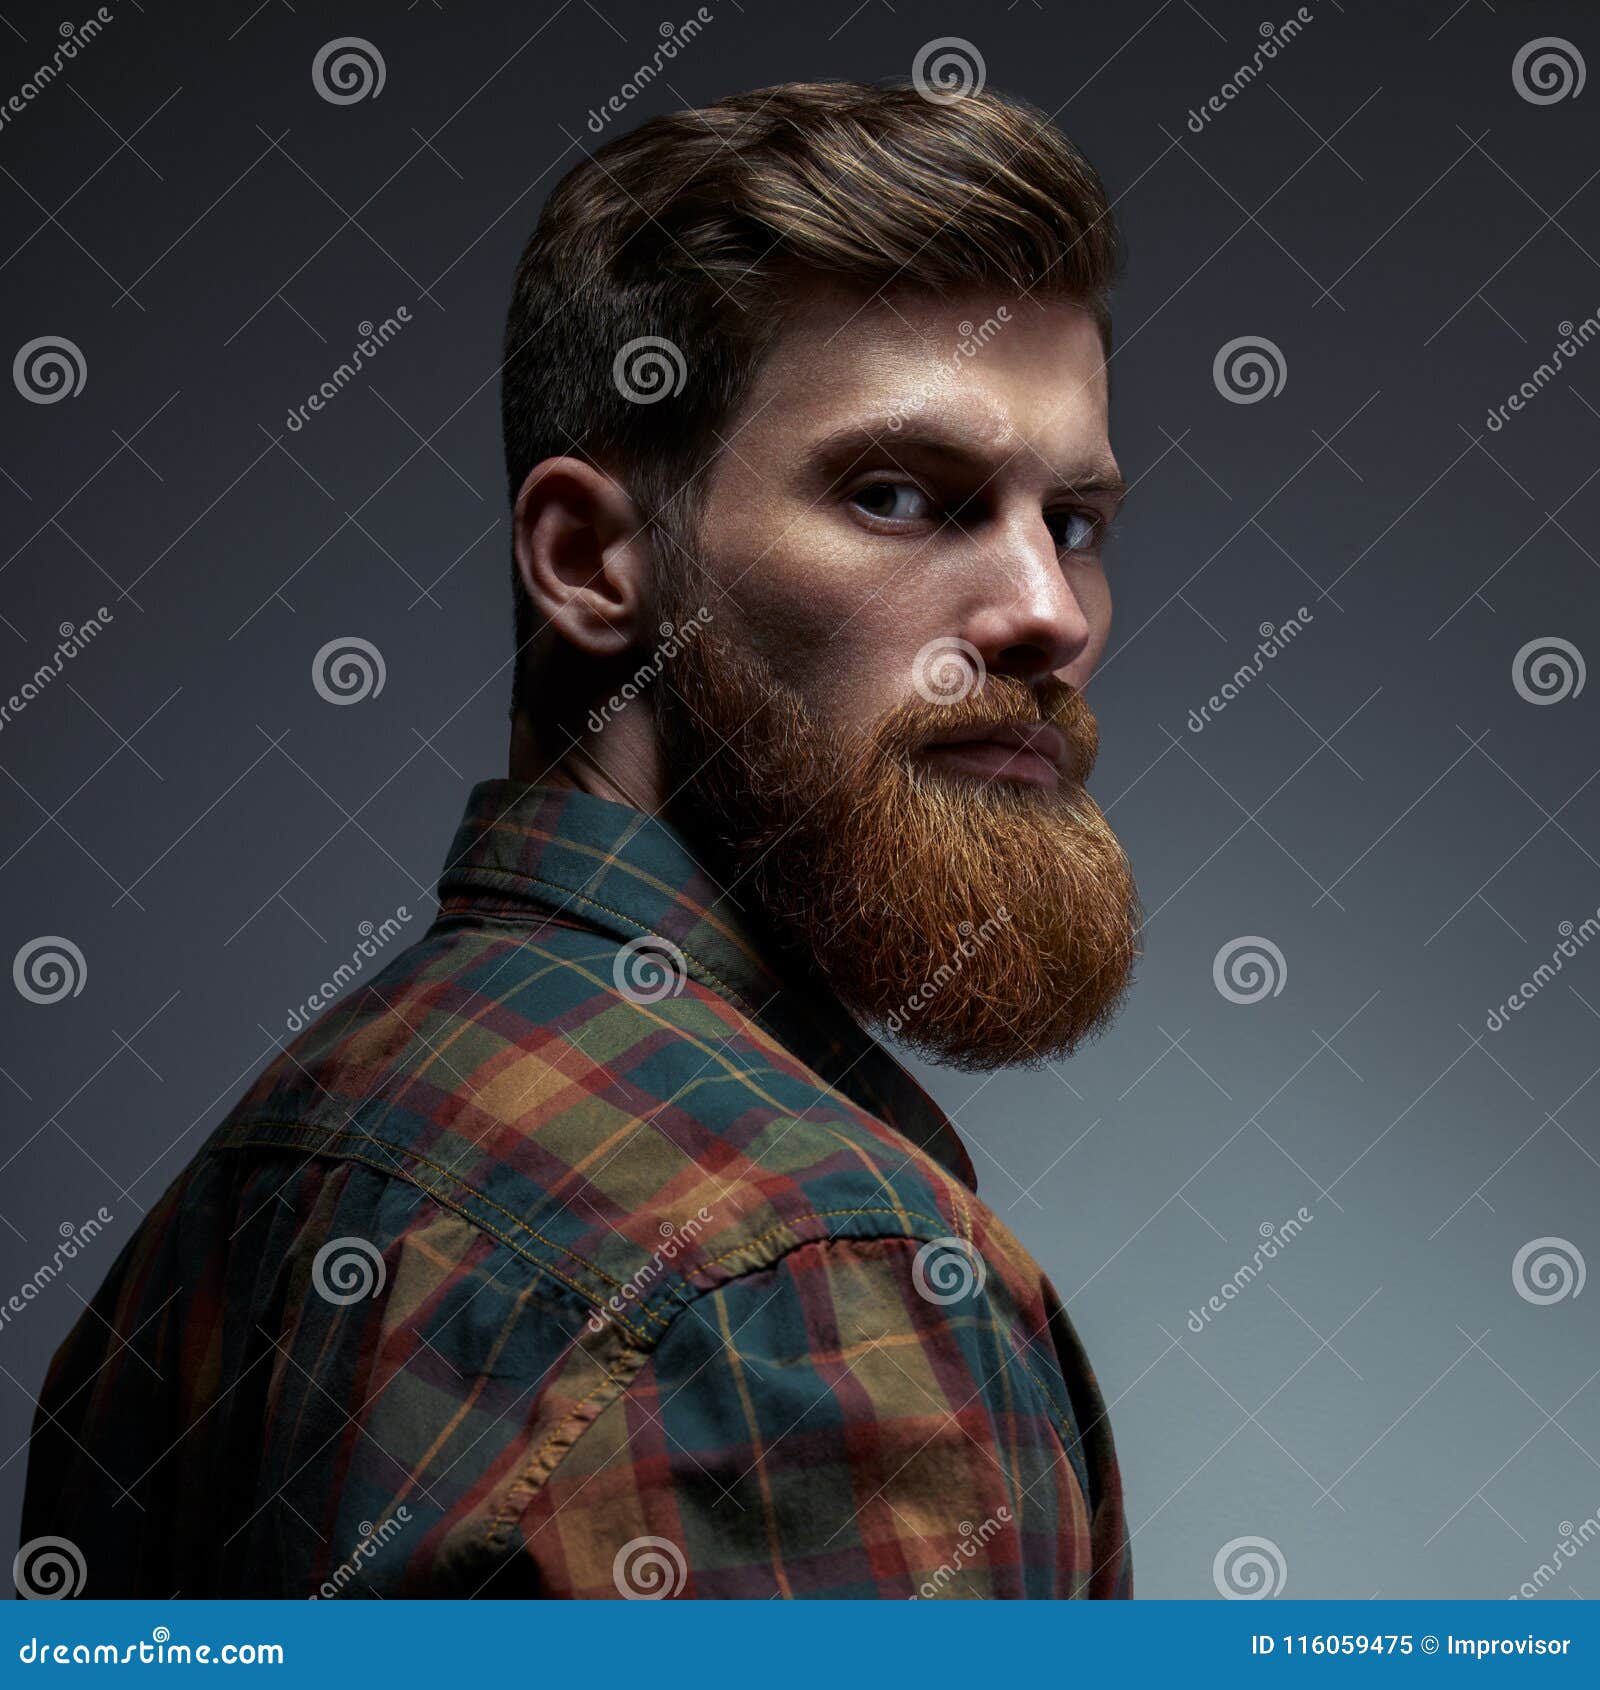 Portrait of a Man with Beard and Modern Hairstyle Stock Image - Image ...